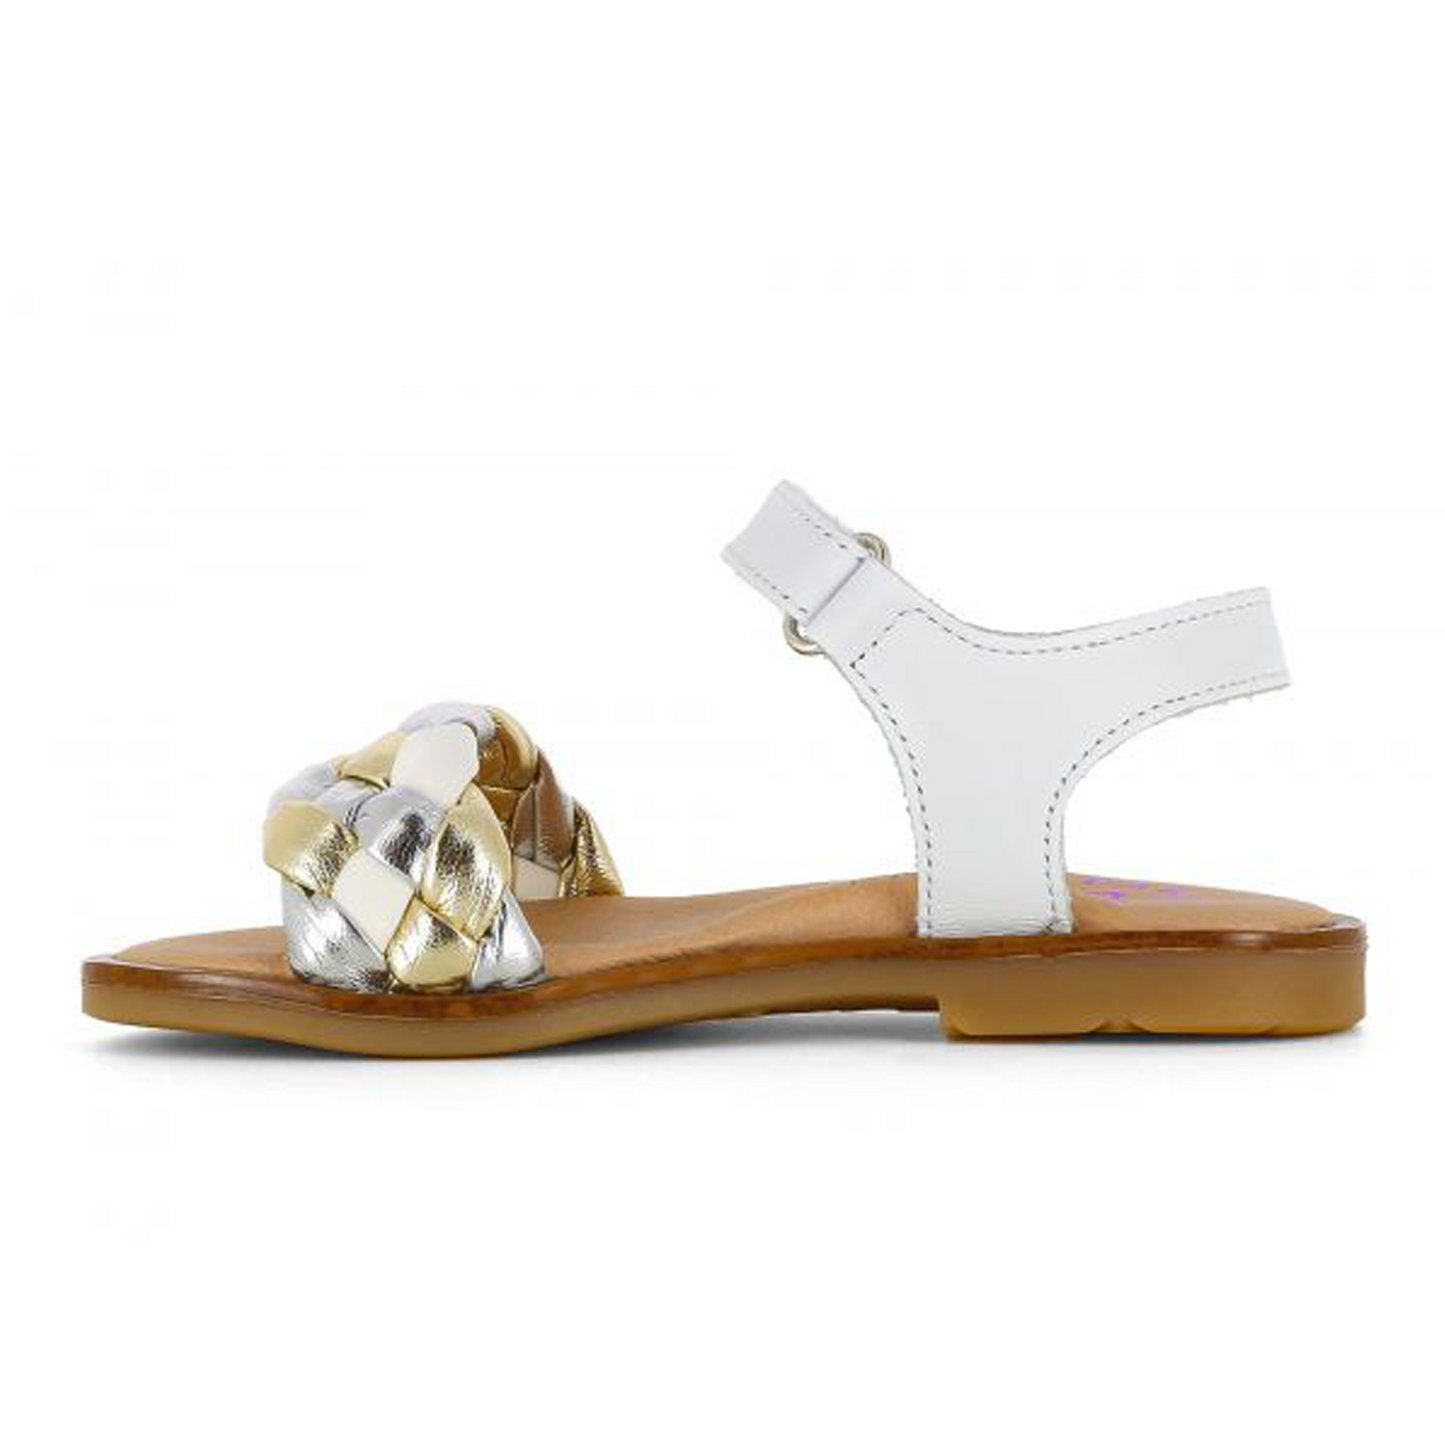 Pablosky Olimpo Sandals